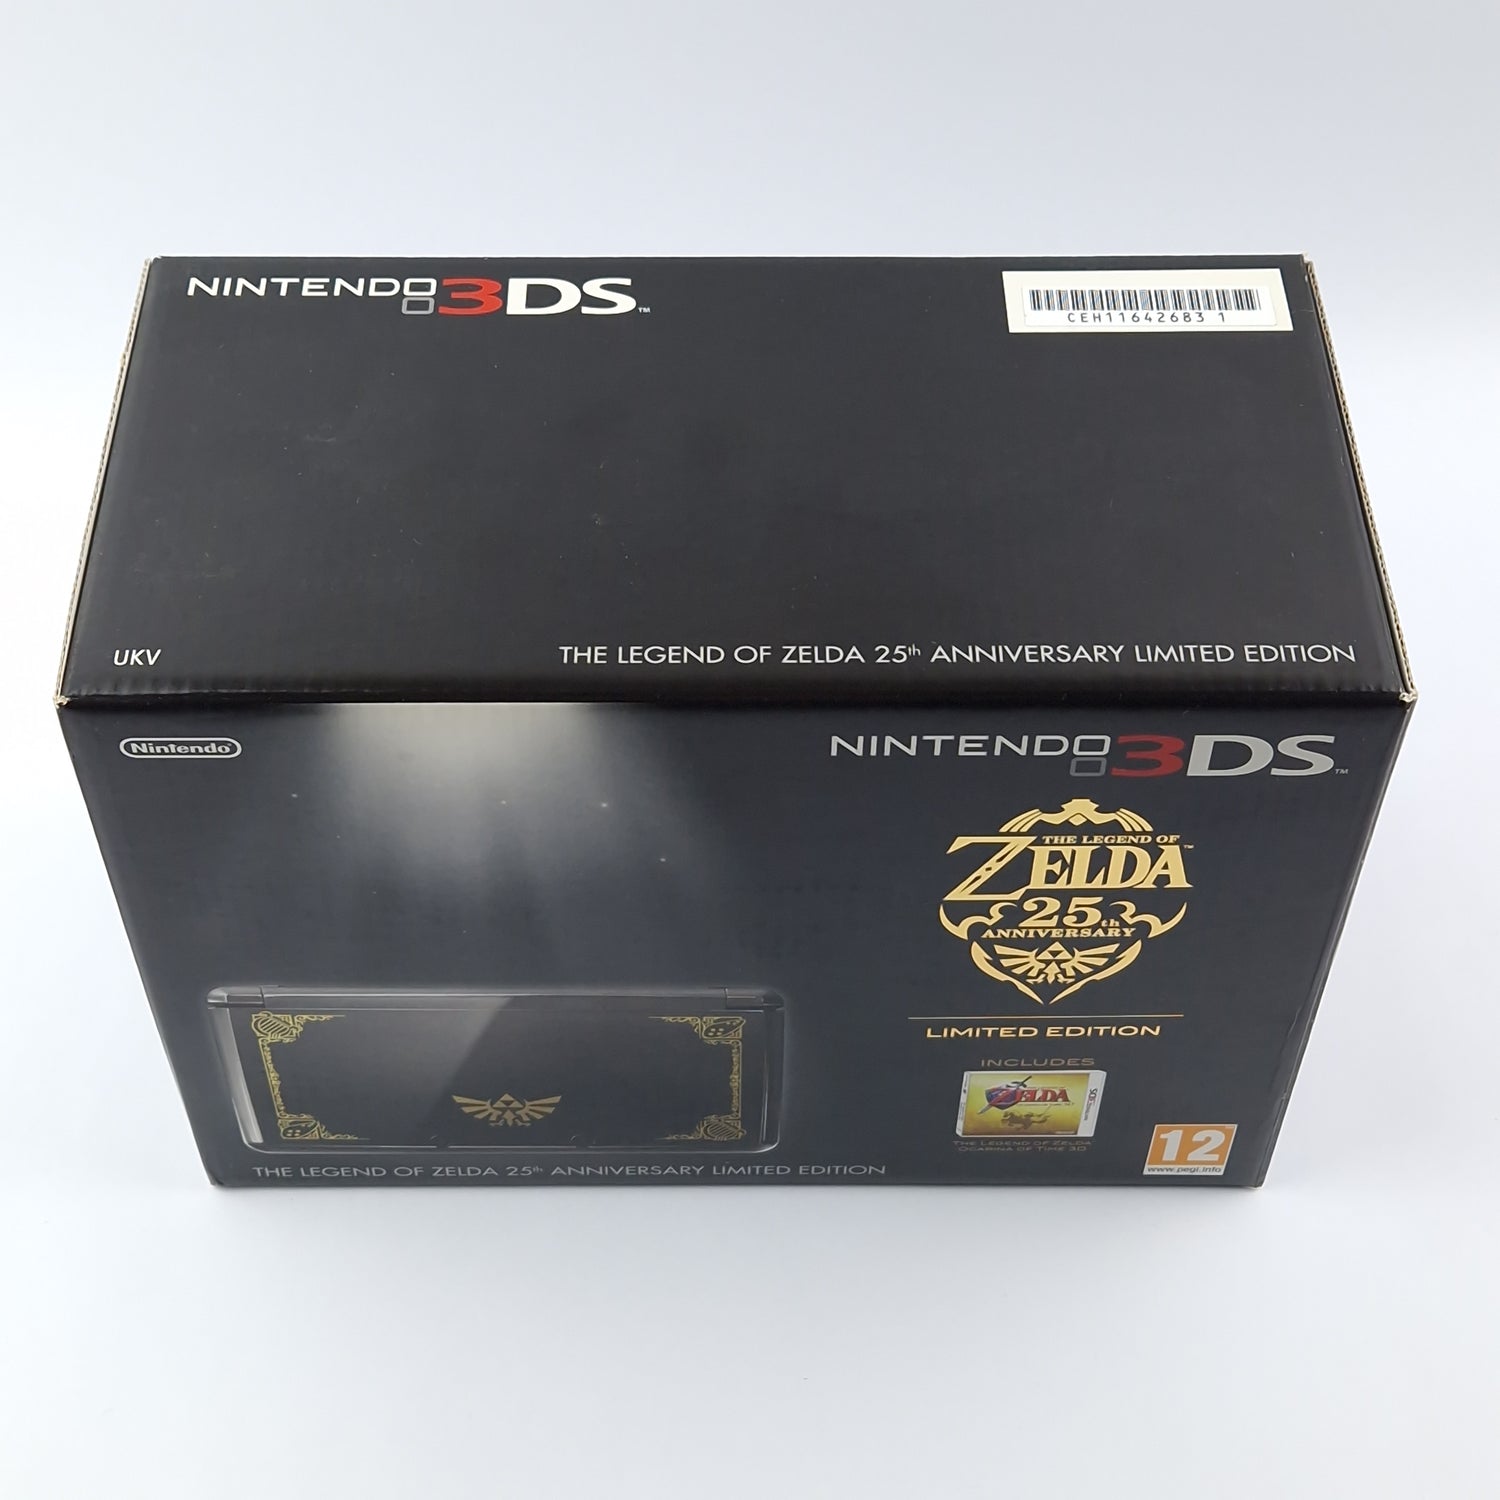 Nintendo 3DS Konsole : The Legend of Zelda 25th Anniversary Limited Edition OVP